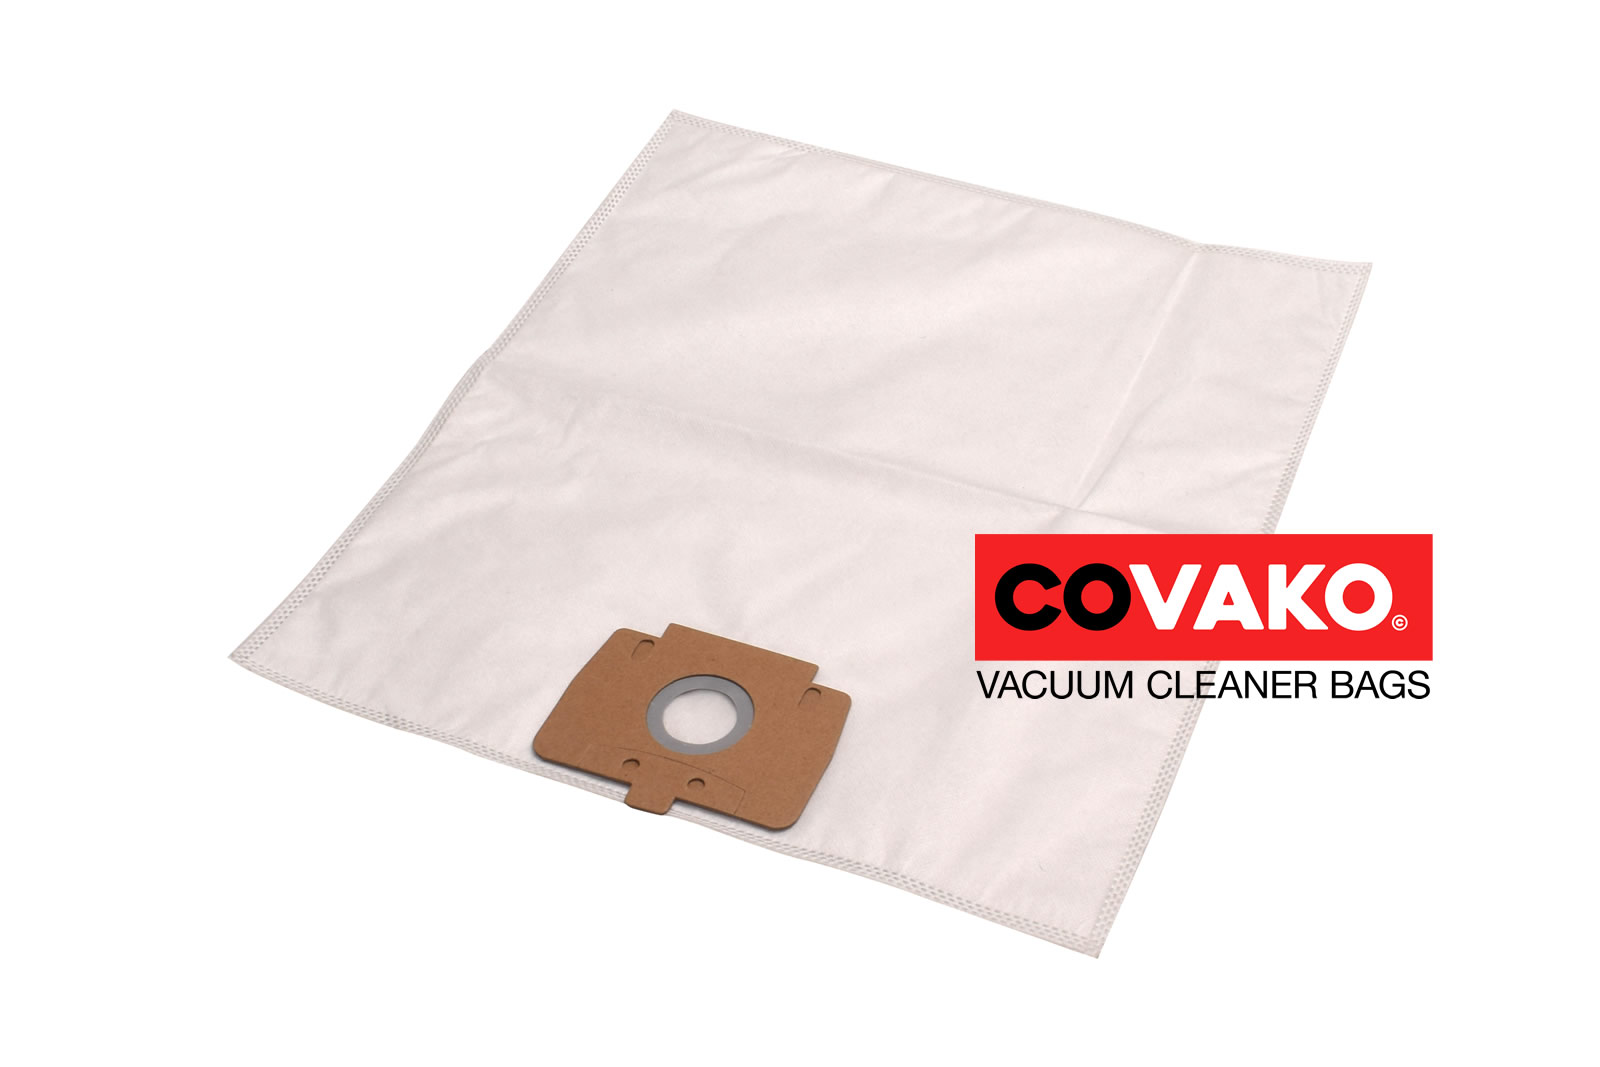 Ecolab S 122 / Synthesis - Ecolab vacuum cleaner bags